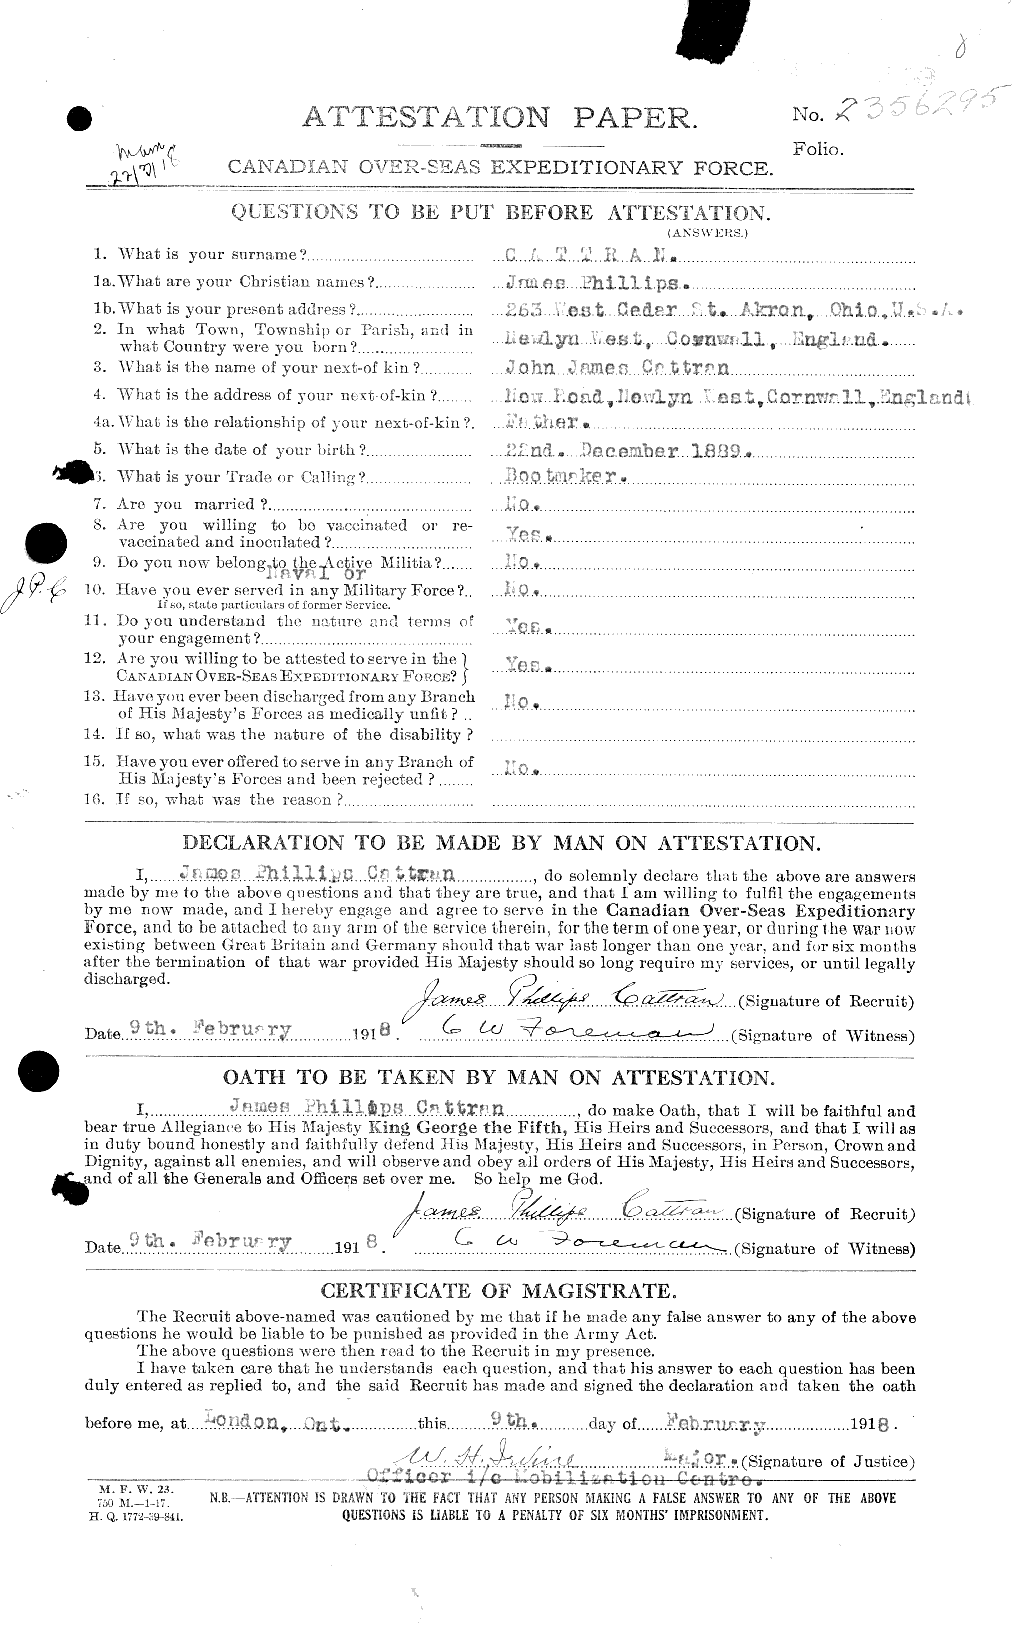 Personnel Records of the First World War - CEF 007464a